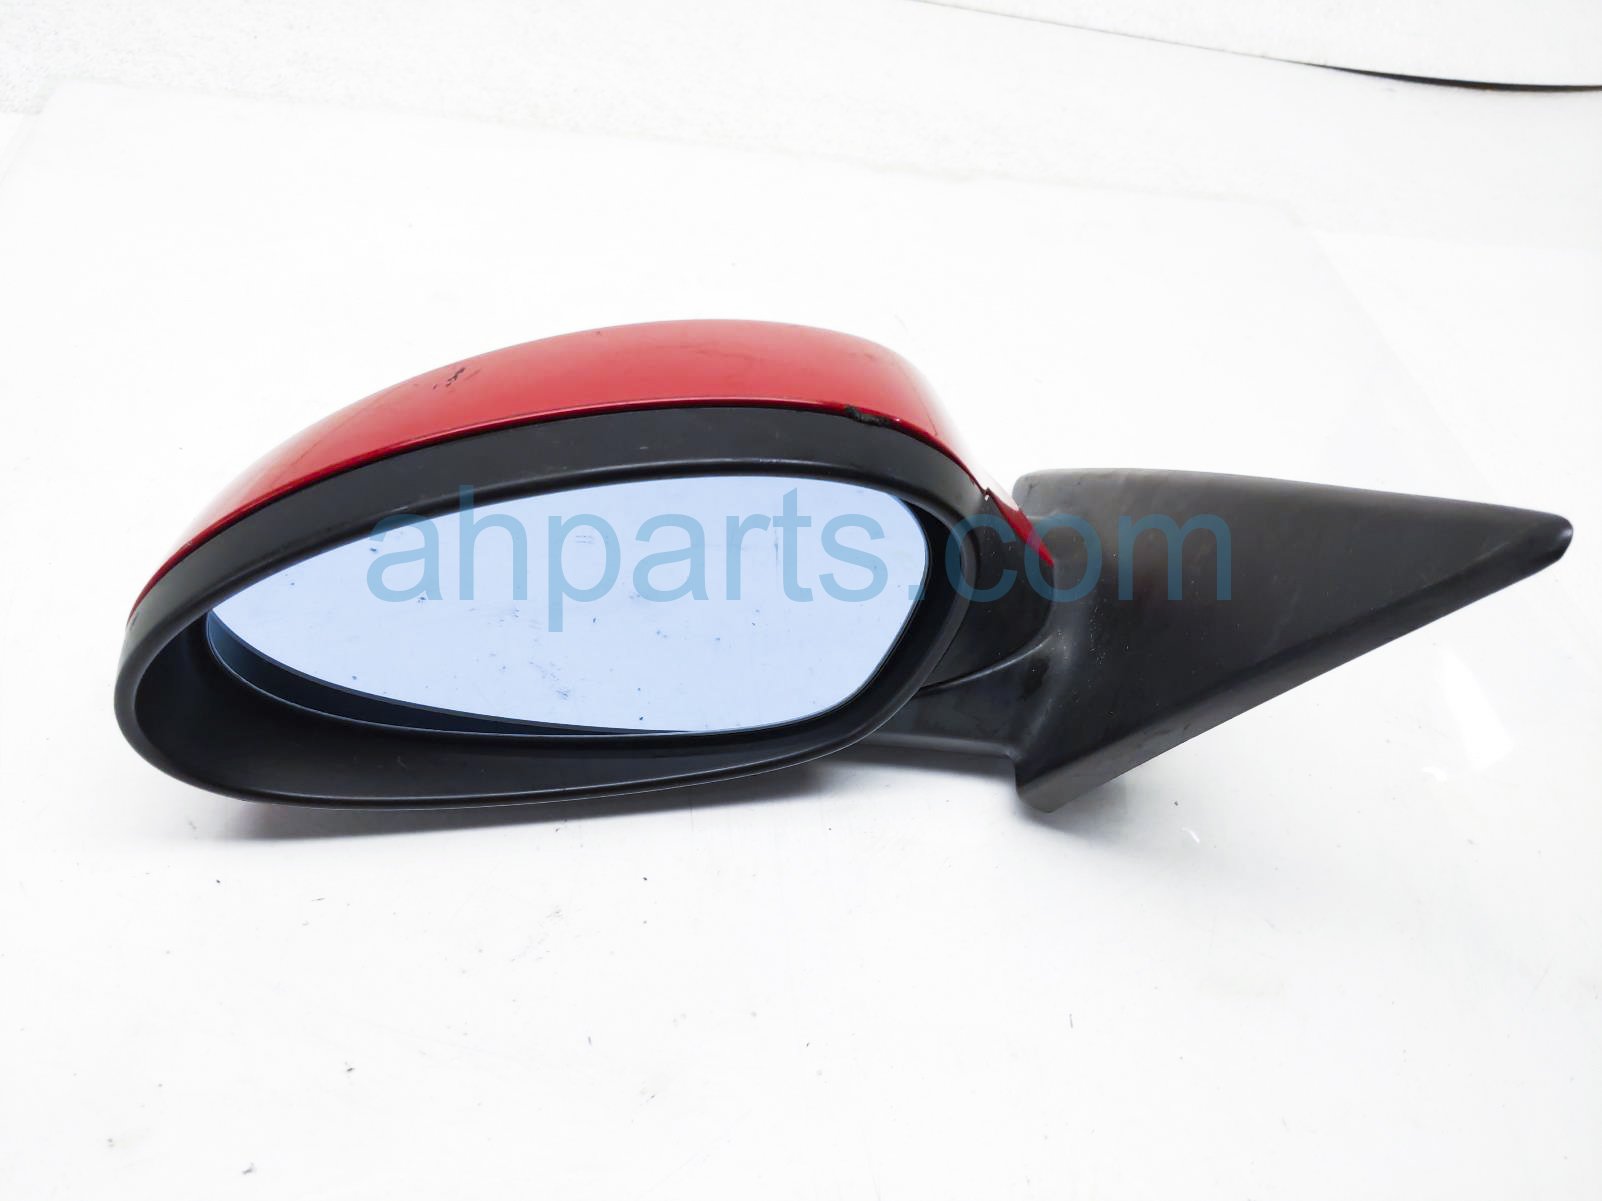 $100 BMW LH SIDE VIEW MIRROR - RED - NOTES